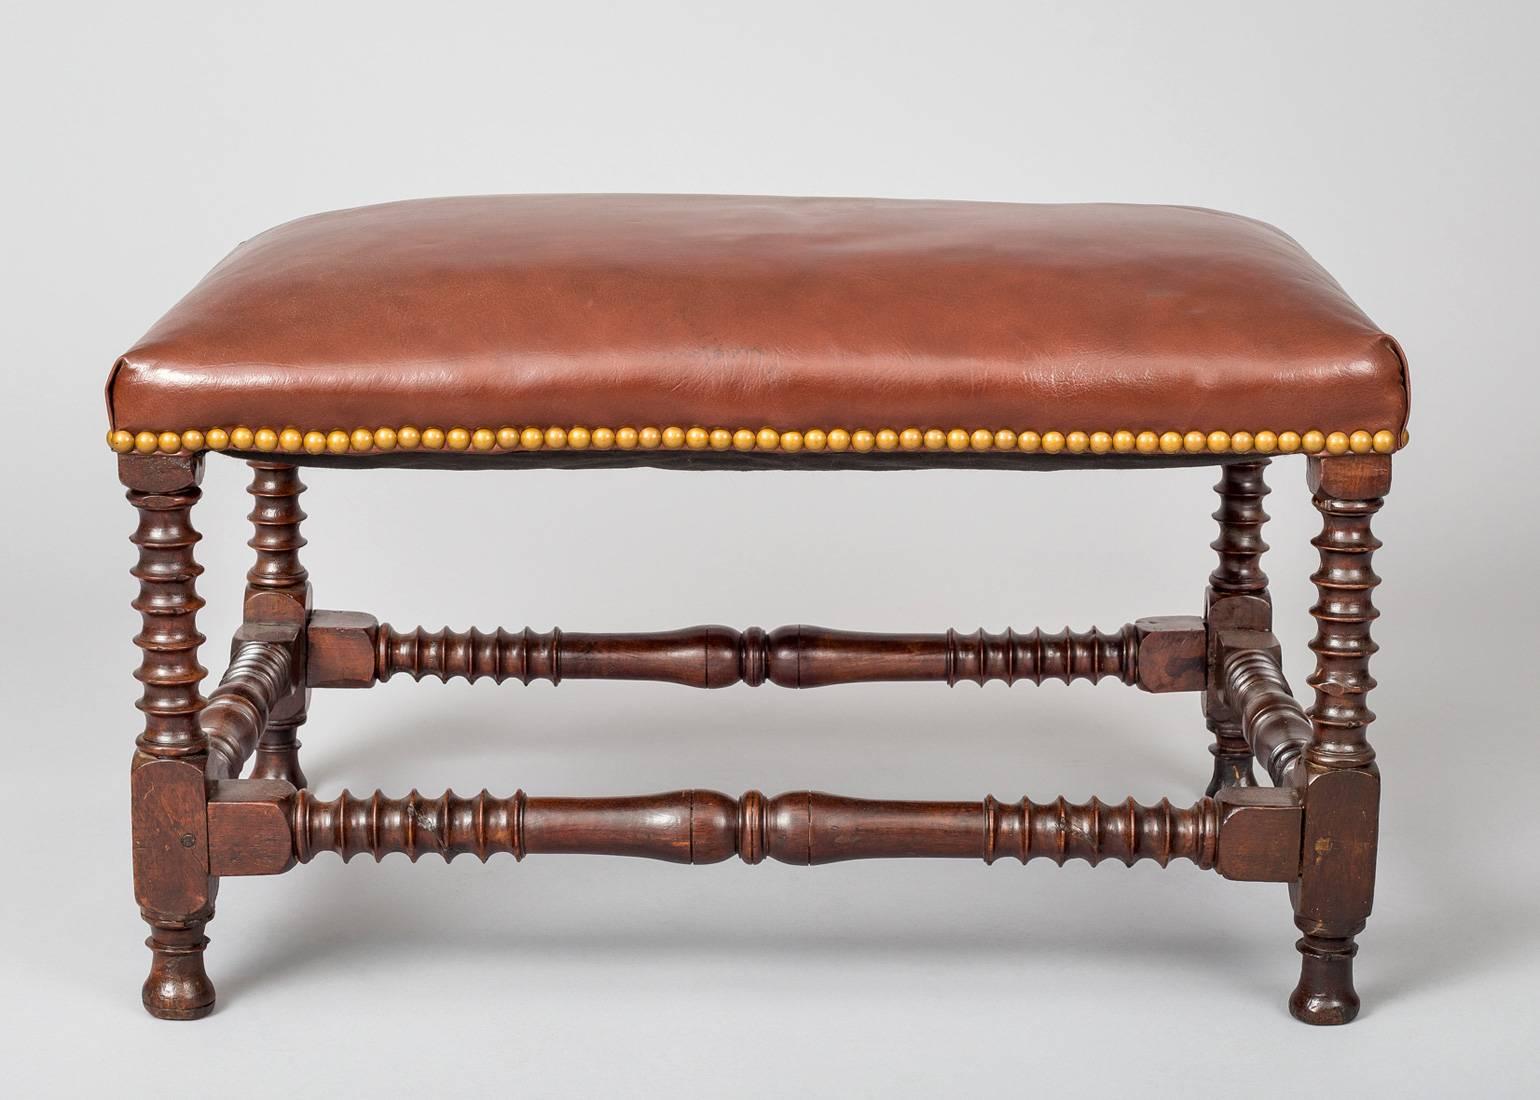 Italian walnut stool with spiral and vase turnings on the legs and stretchers.  Upholstered in brown leather with brass nail heads.